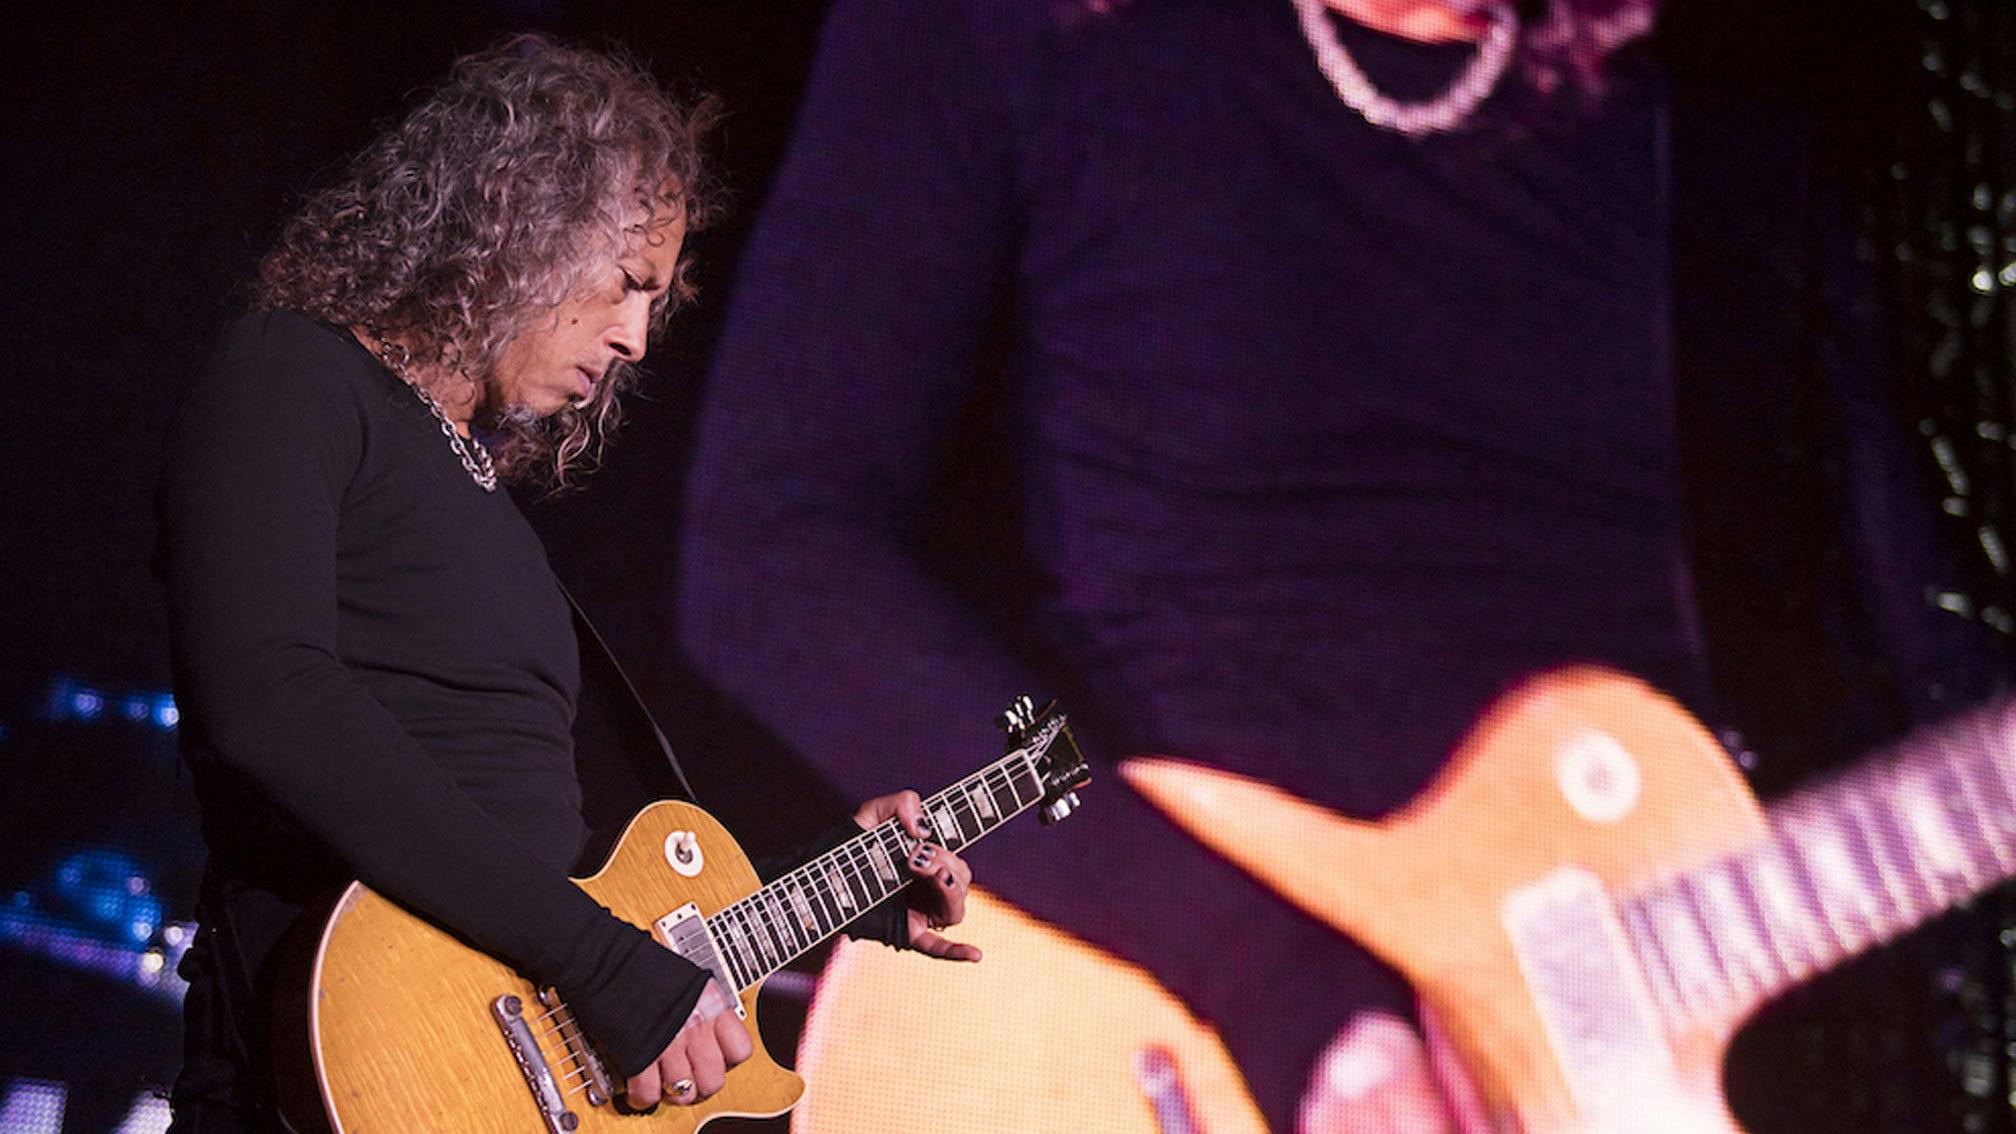 Kirk Hammett: “It’s weird, I’m 59 years old and I don’t think I’ve even peaked creatively or musically”